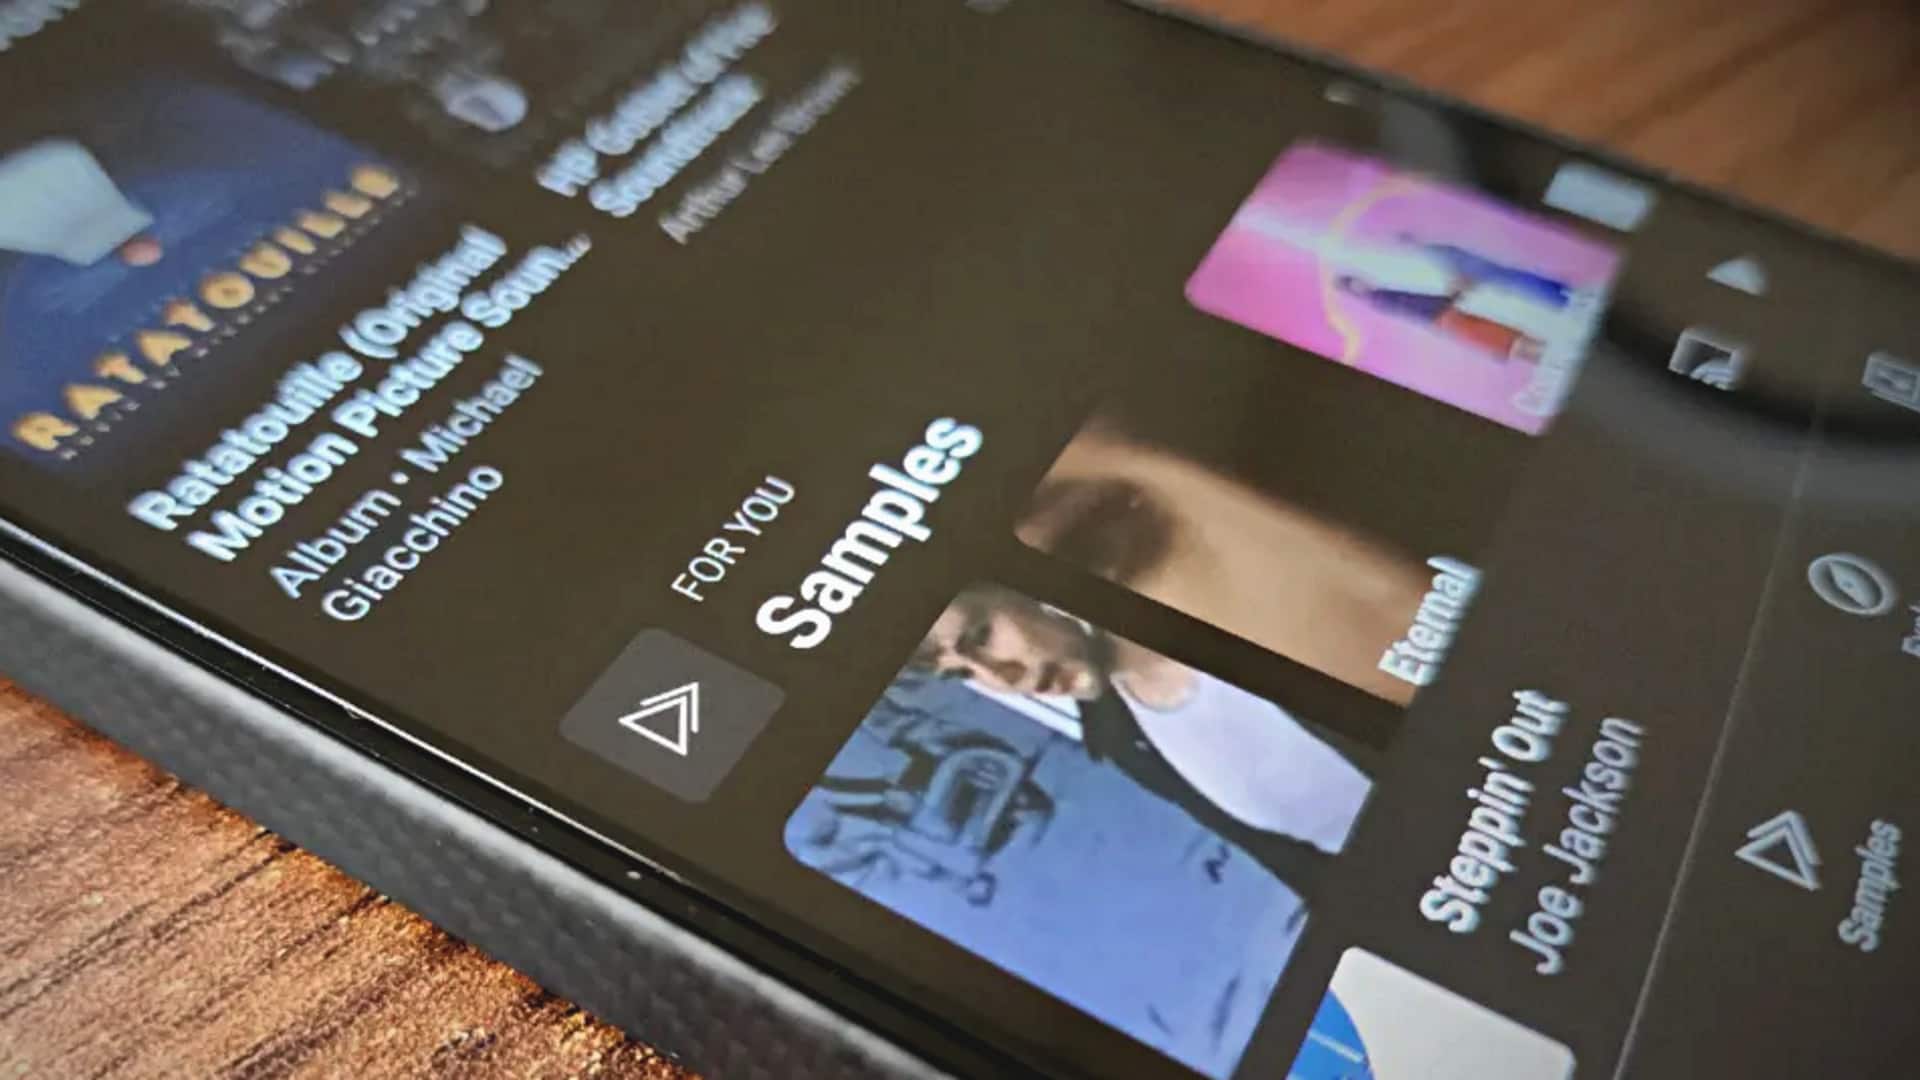 YouTube Music rolls out TikTok-style 'Samples' feature: How it works